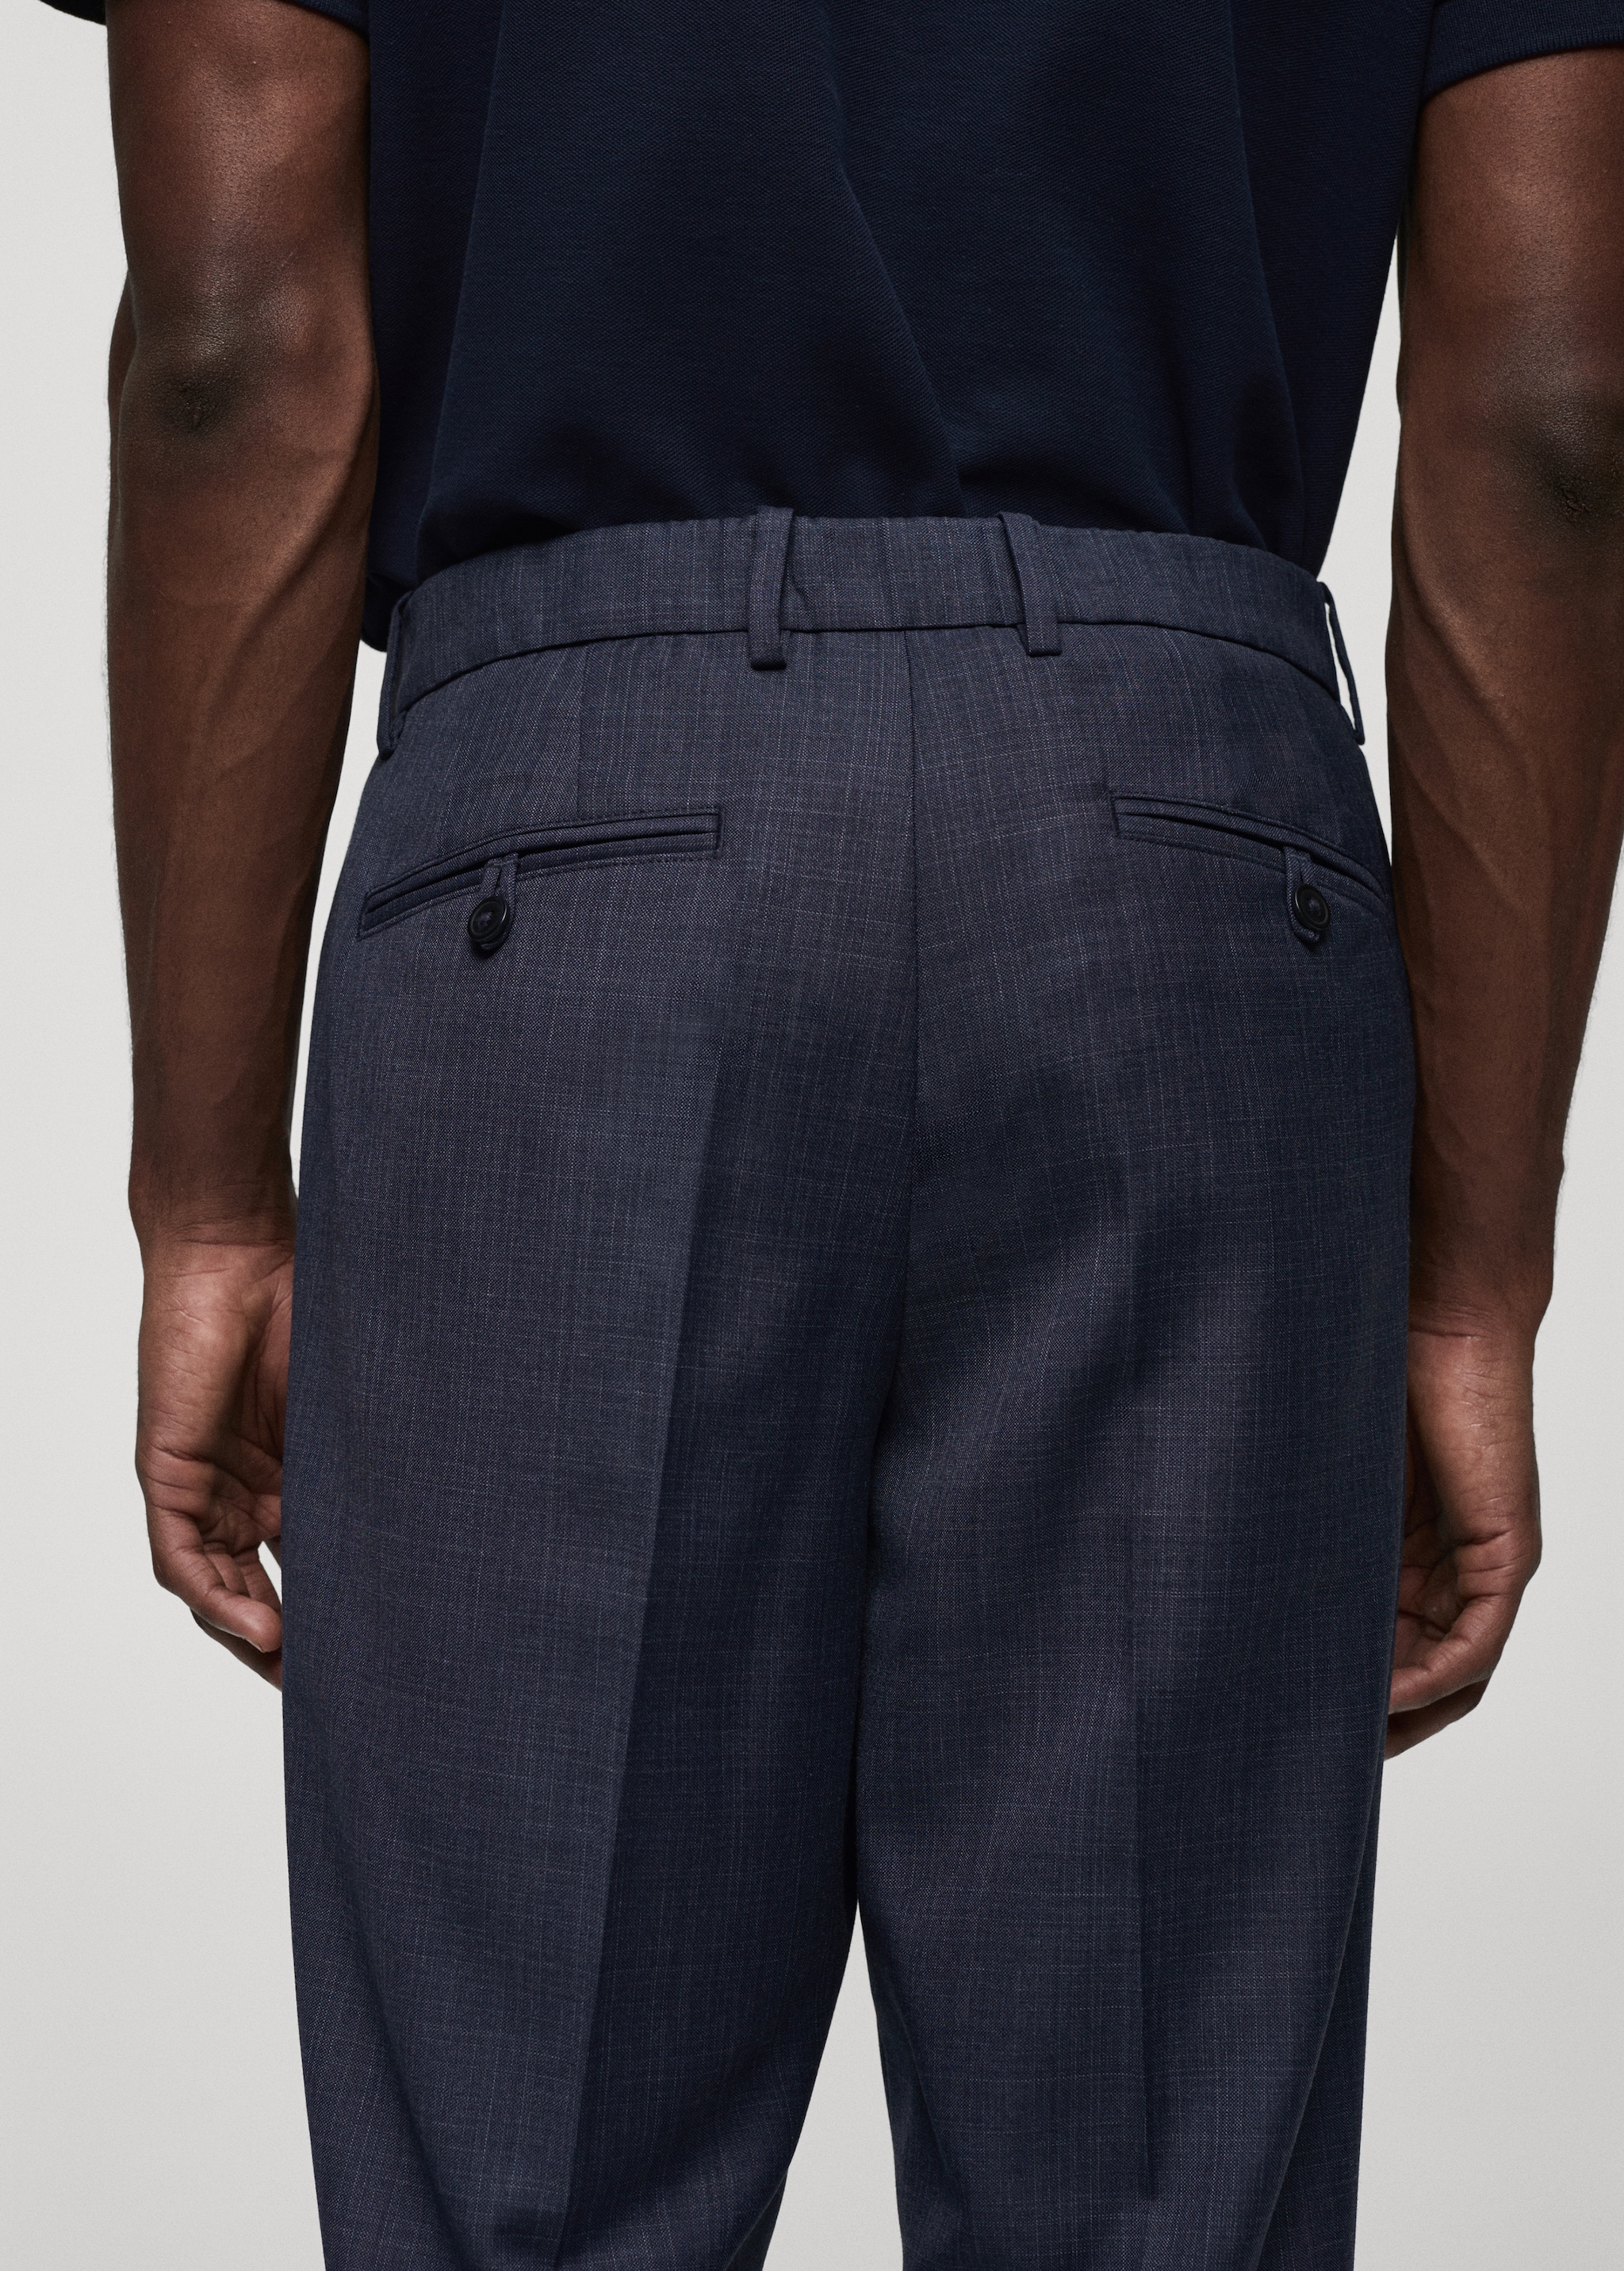 Pleat detail wool pants - Details of the article 6